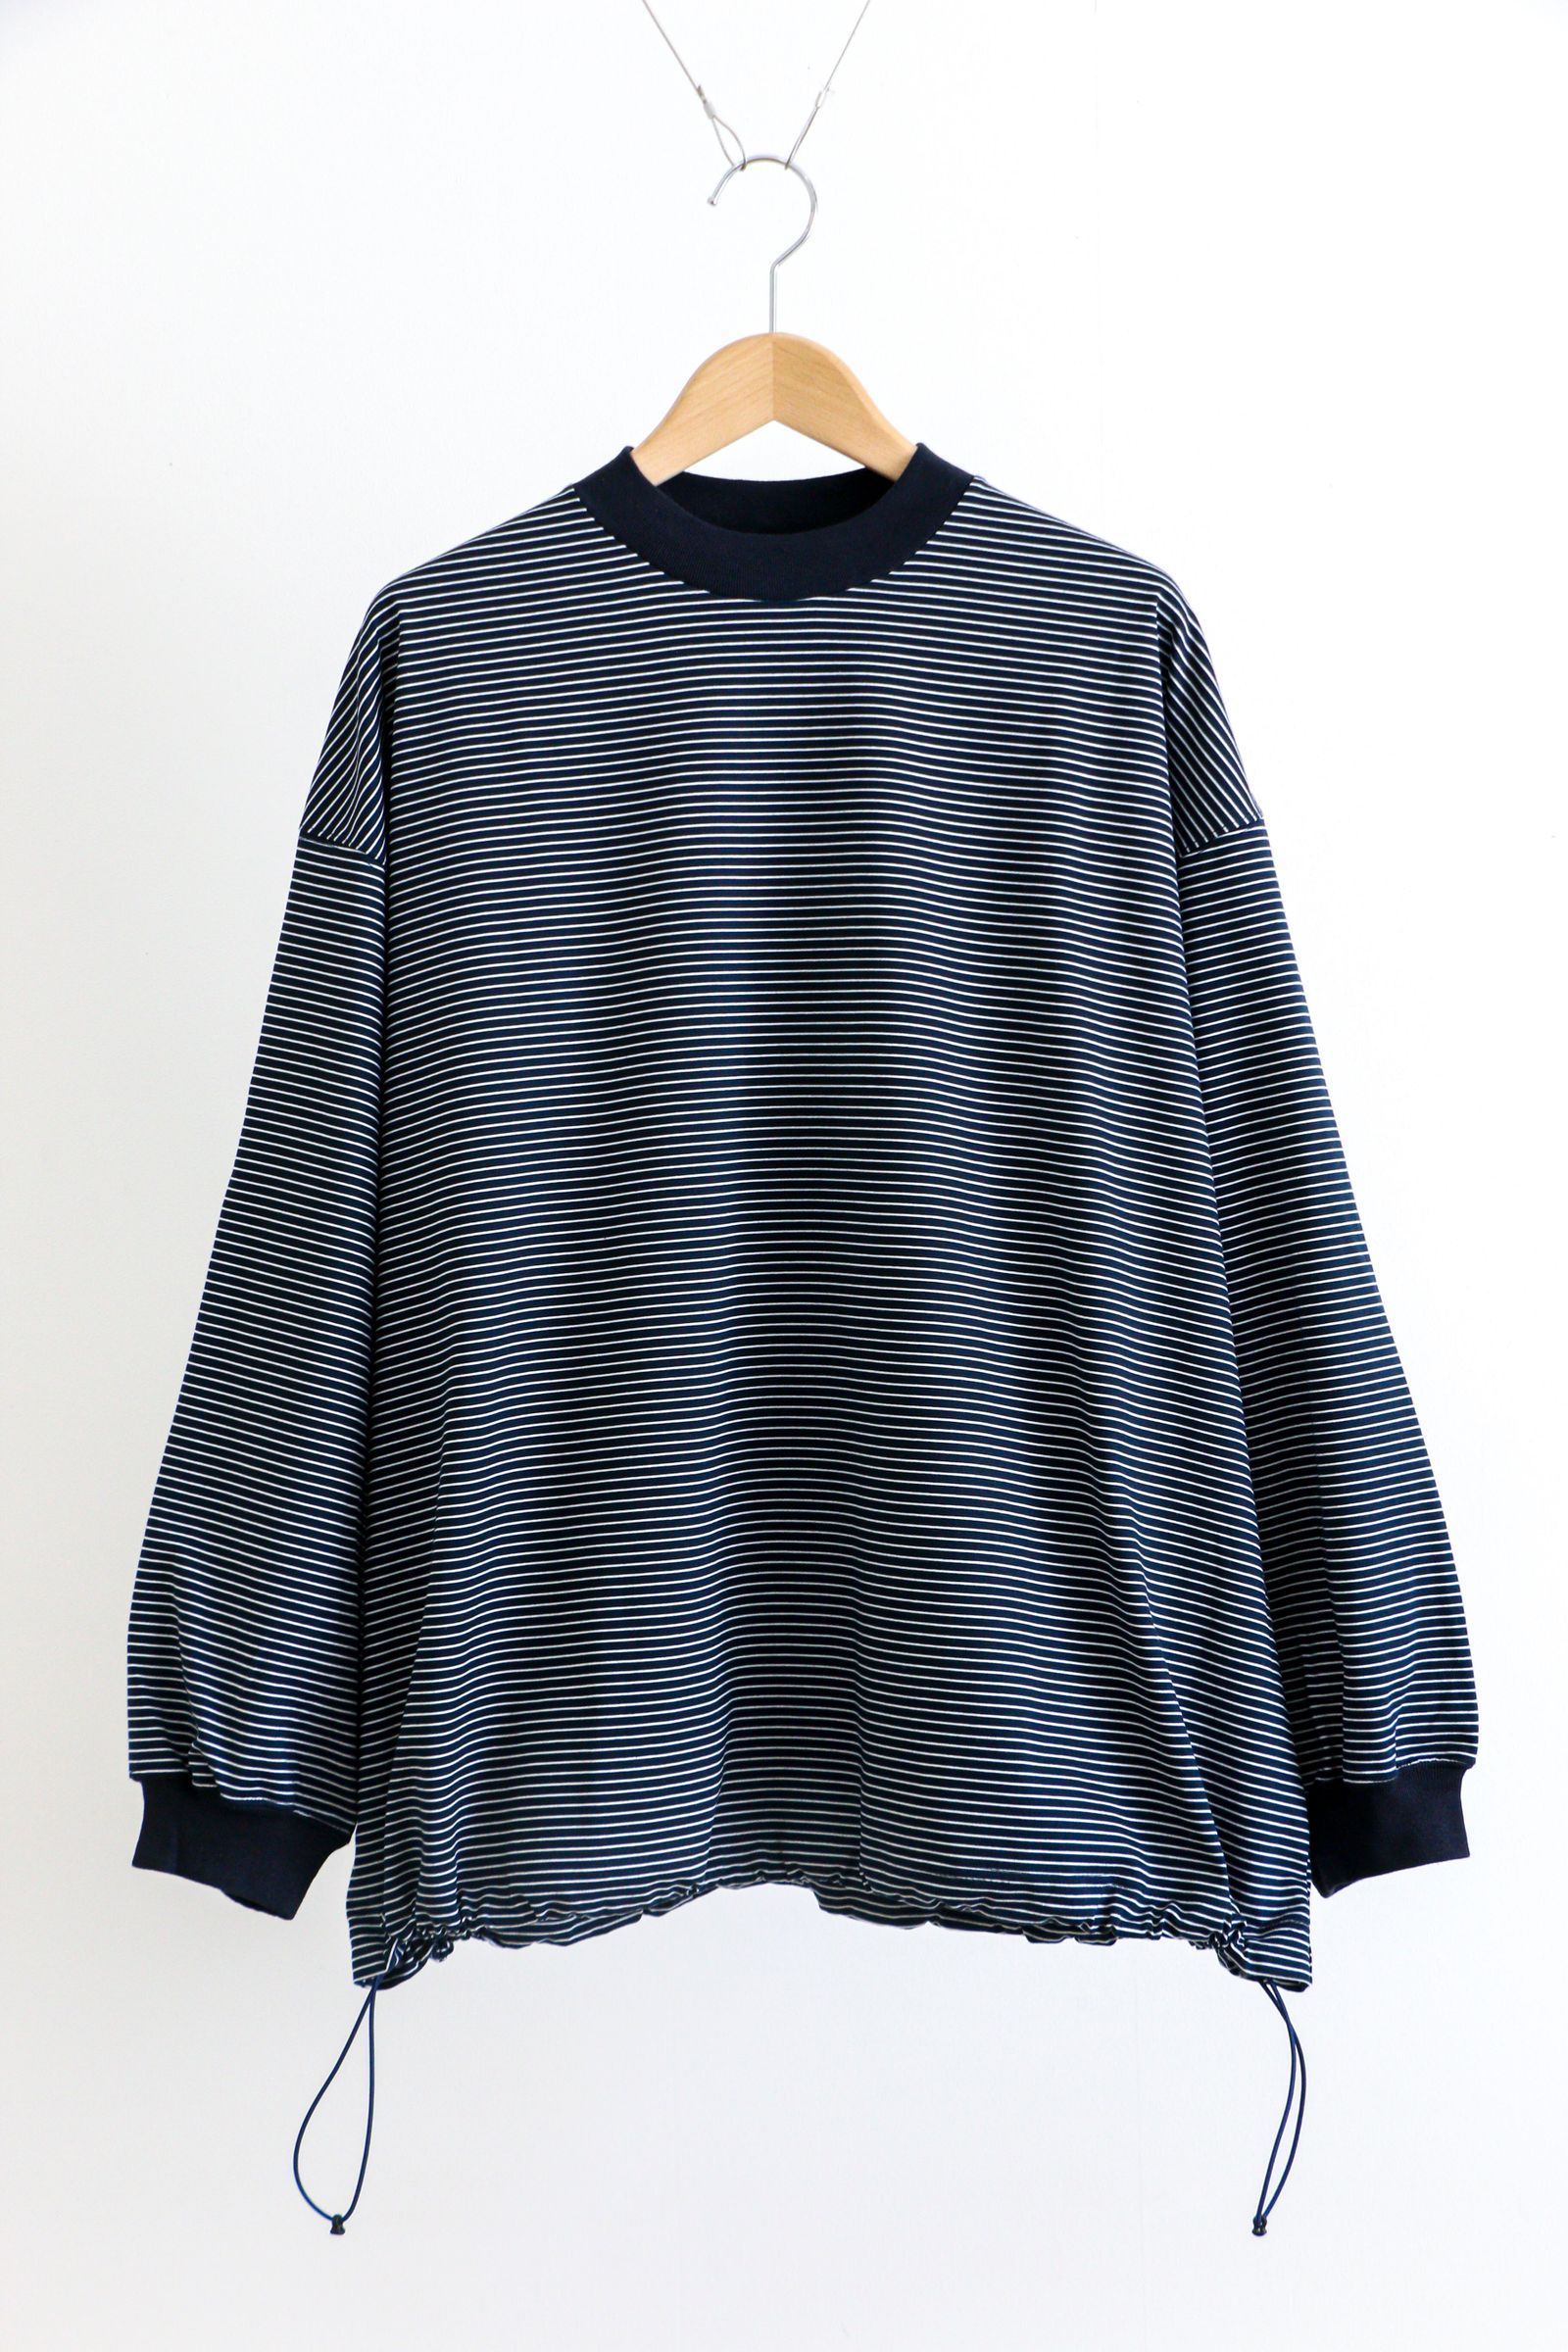 is-ness - BALLOON LONG T SHIRT NAVY x WHITE / ロングスリーブ ...